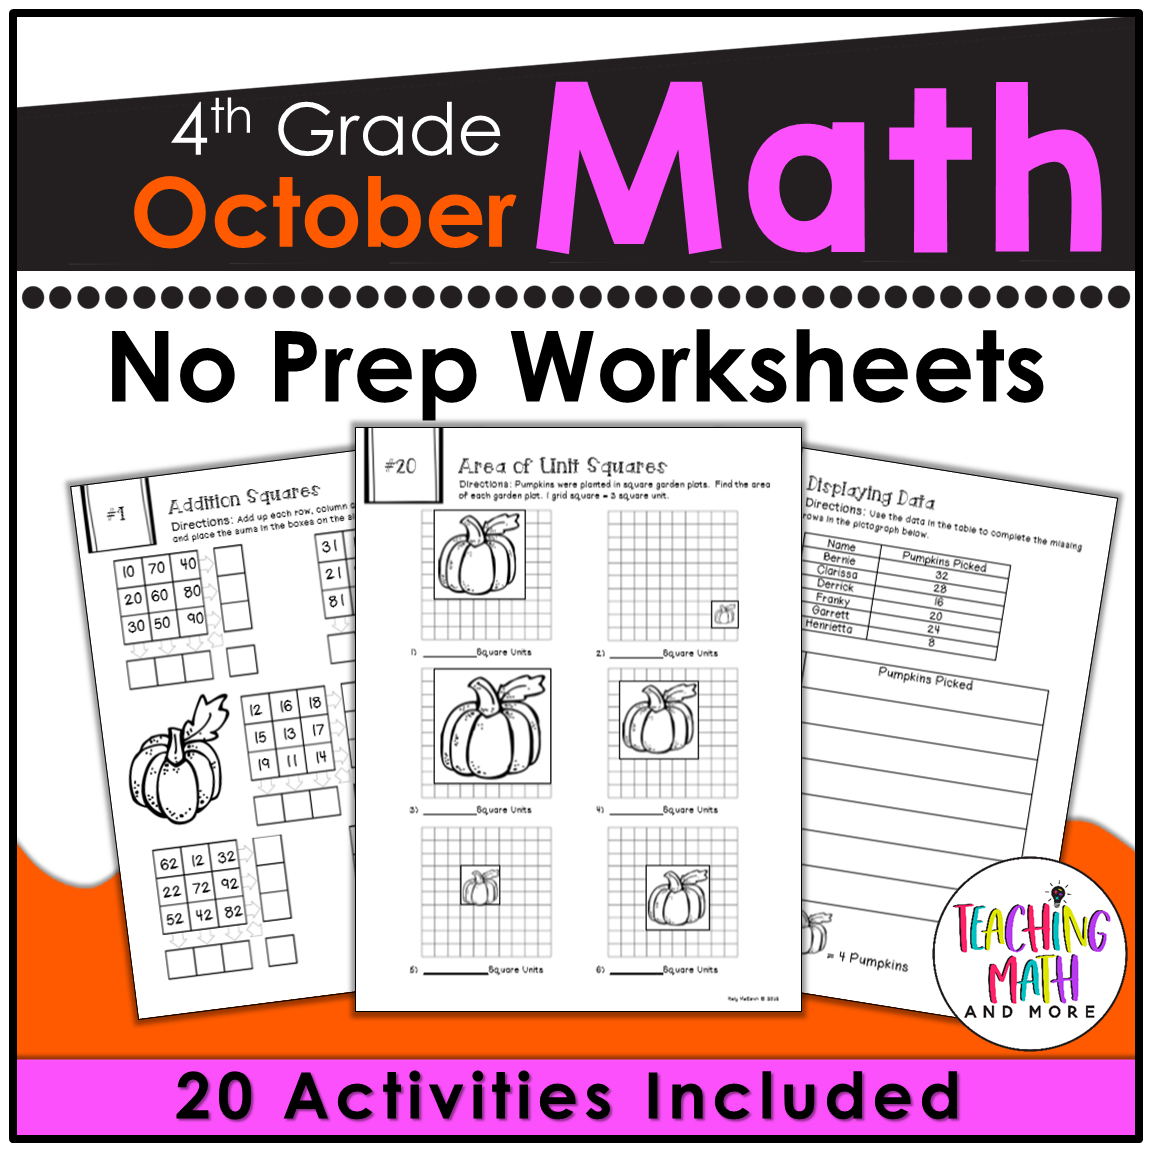 4th-grade-october-math-worksheets-teaching-math-and-more